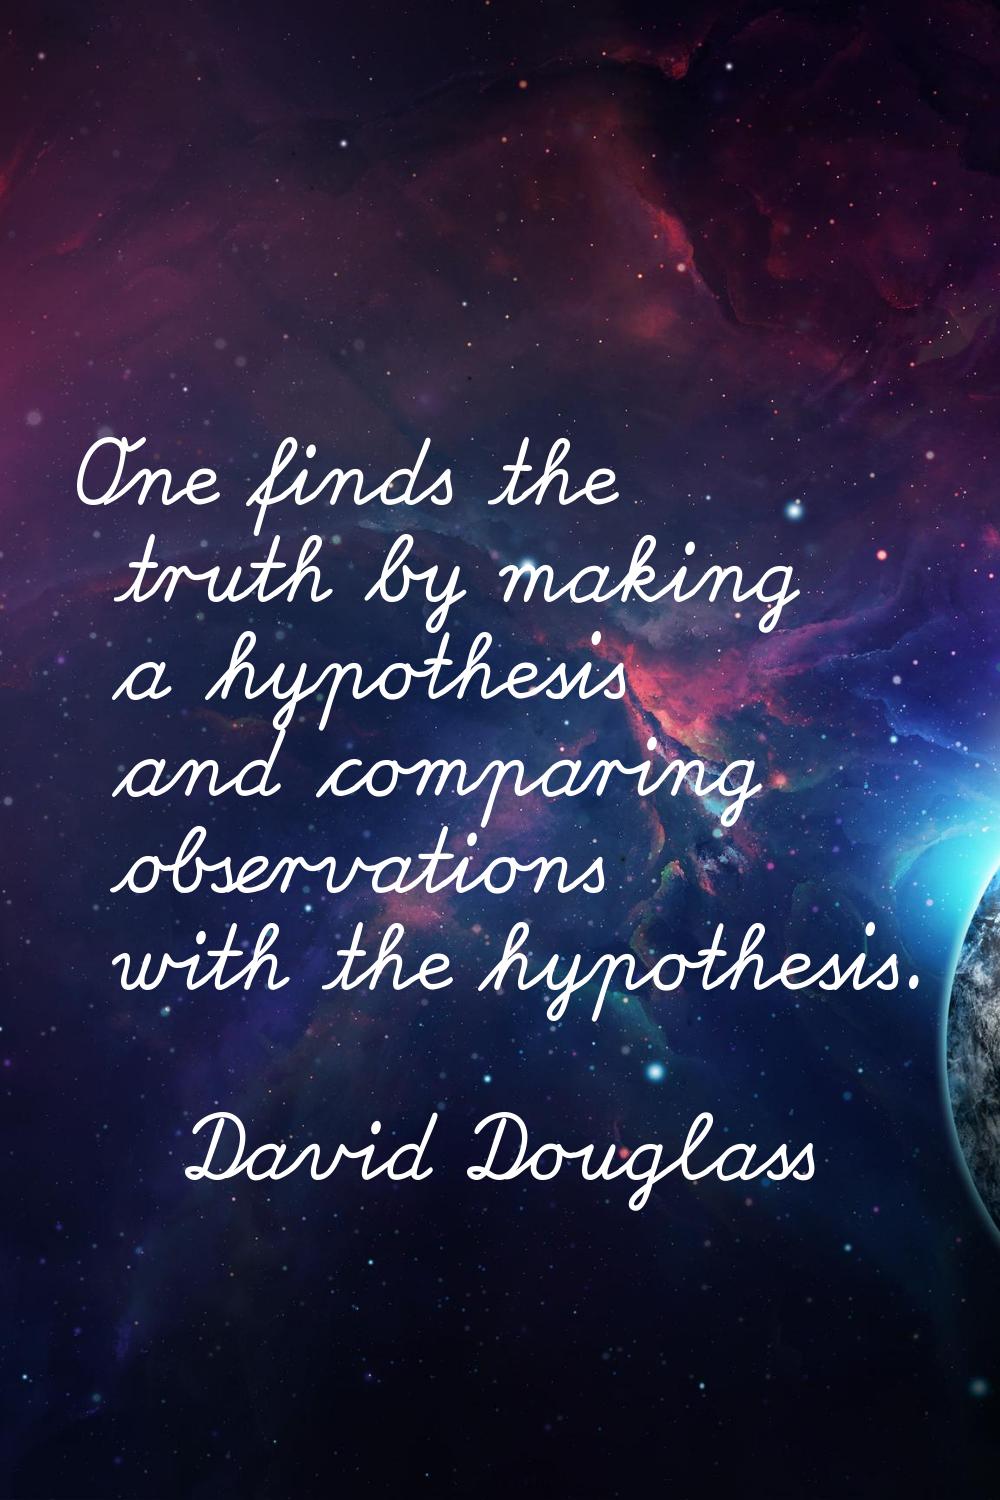 One finds the truth by making a hypothesis and comparing observations with the hypothesis.